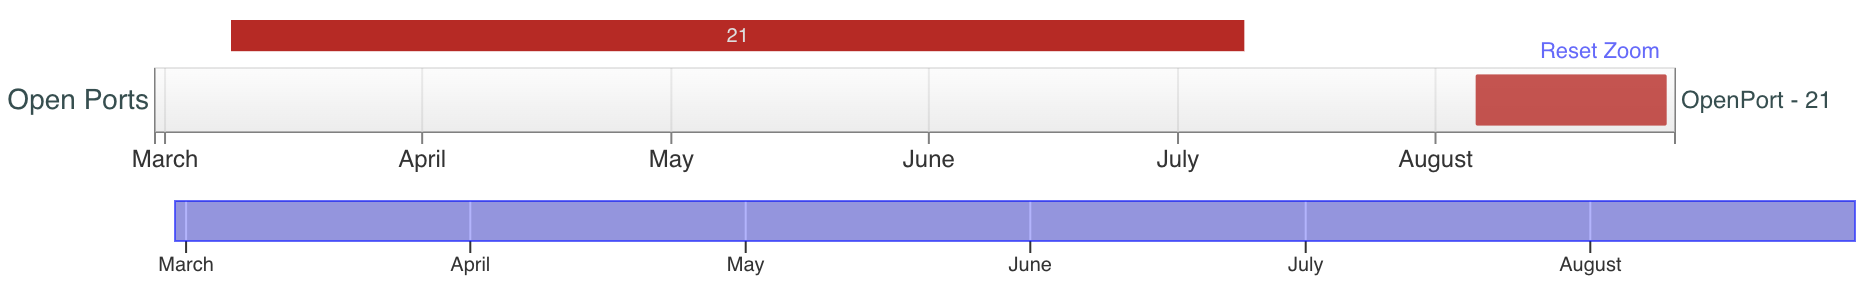 Image 12 is the timeline of open port 21. It is indicated by red. The timeline goes from March to August 2023.